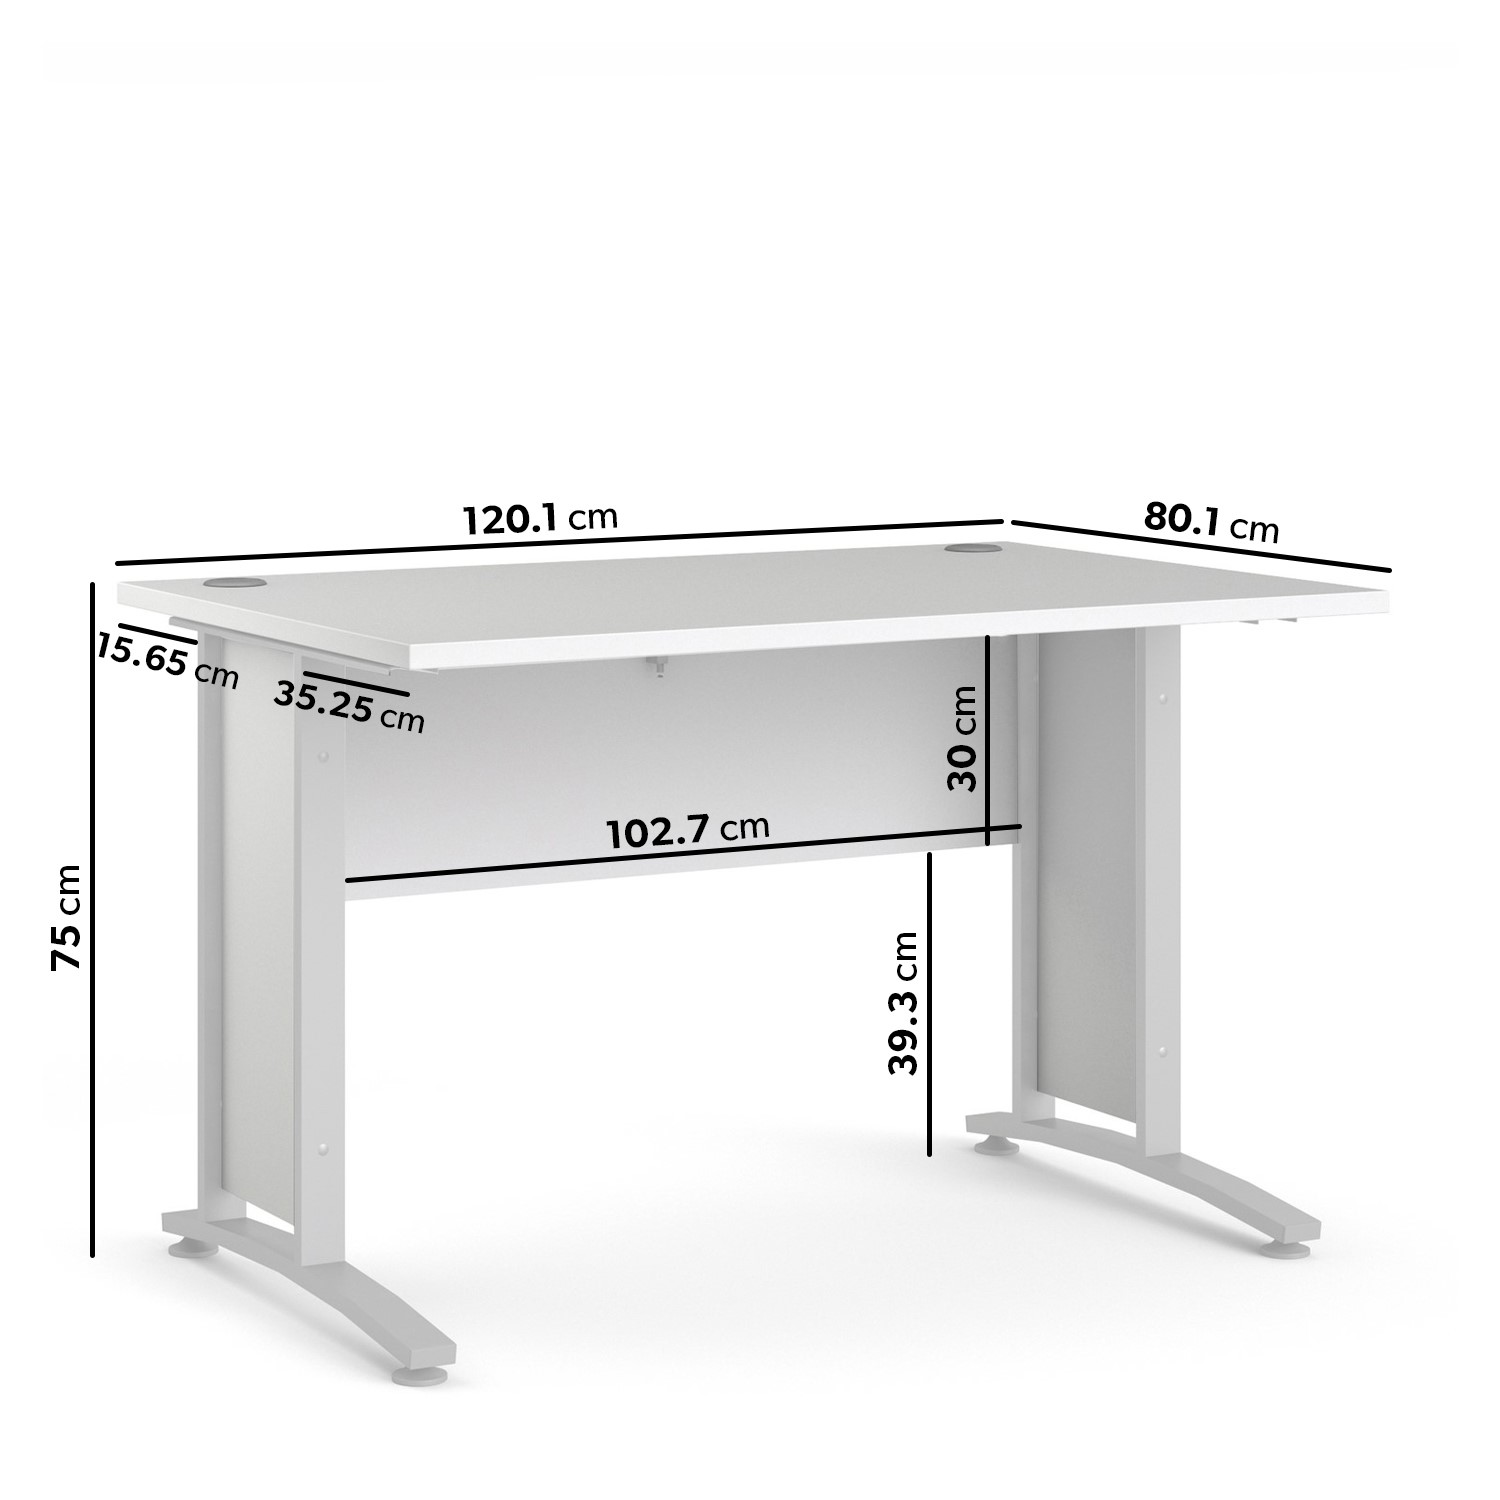 Read more about Small white office desk with white legs prima